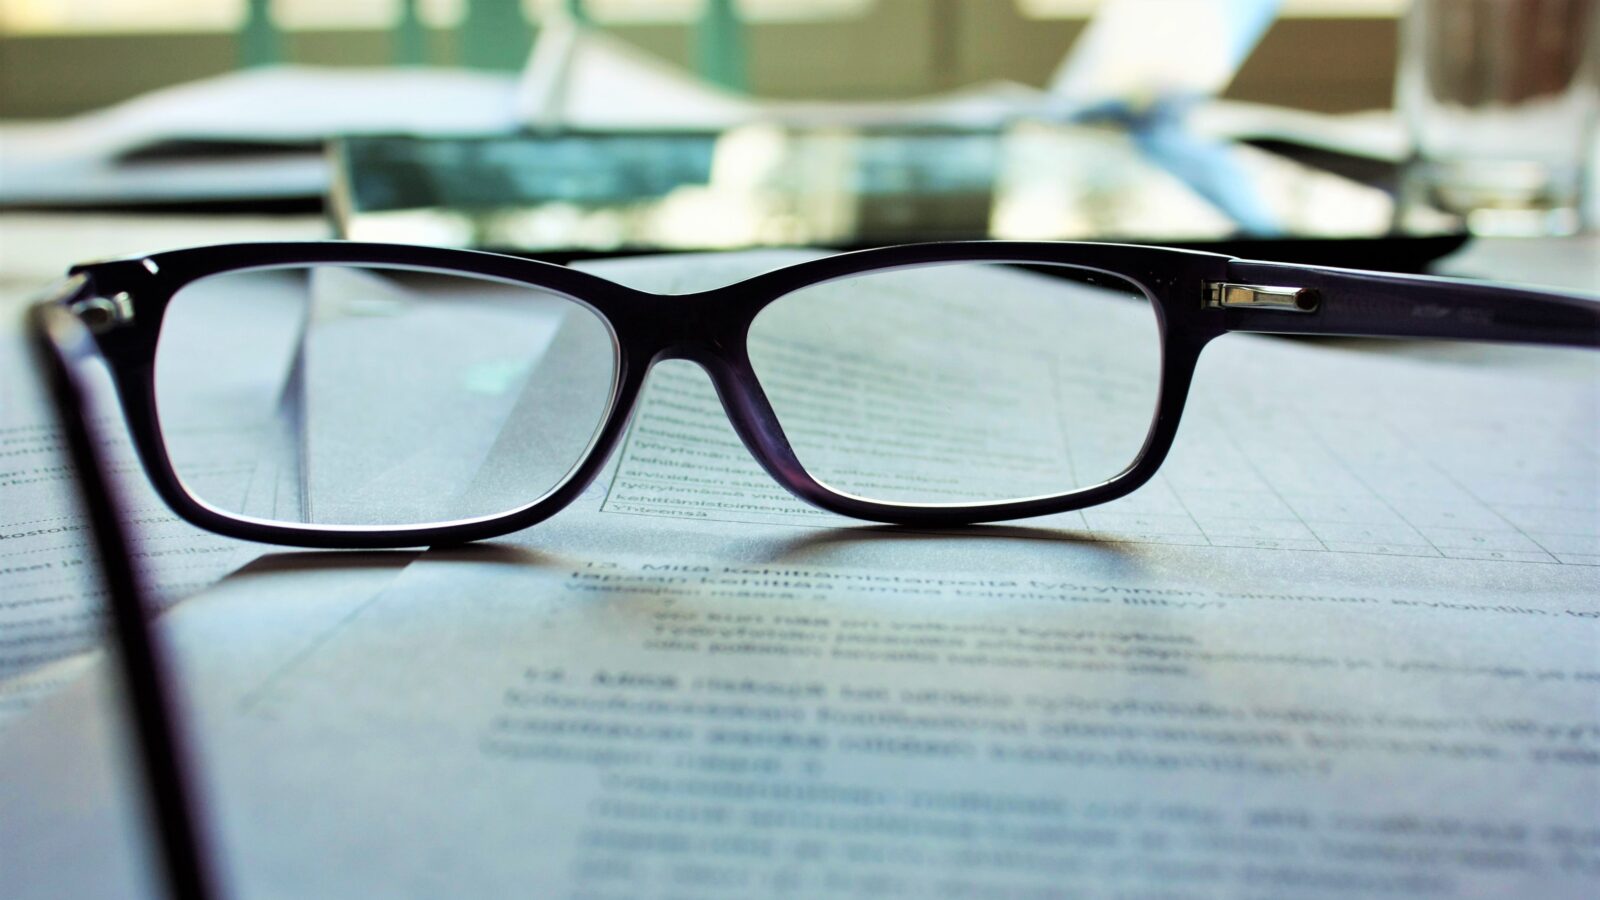 eye glasses atop legal documents